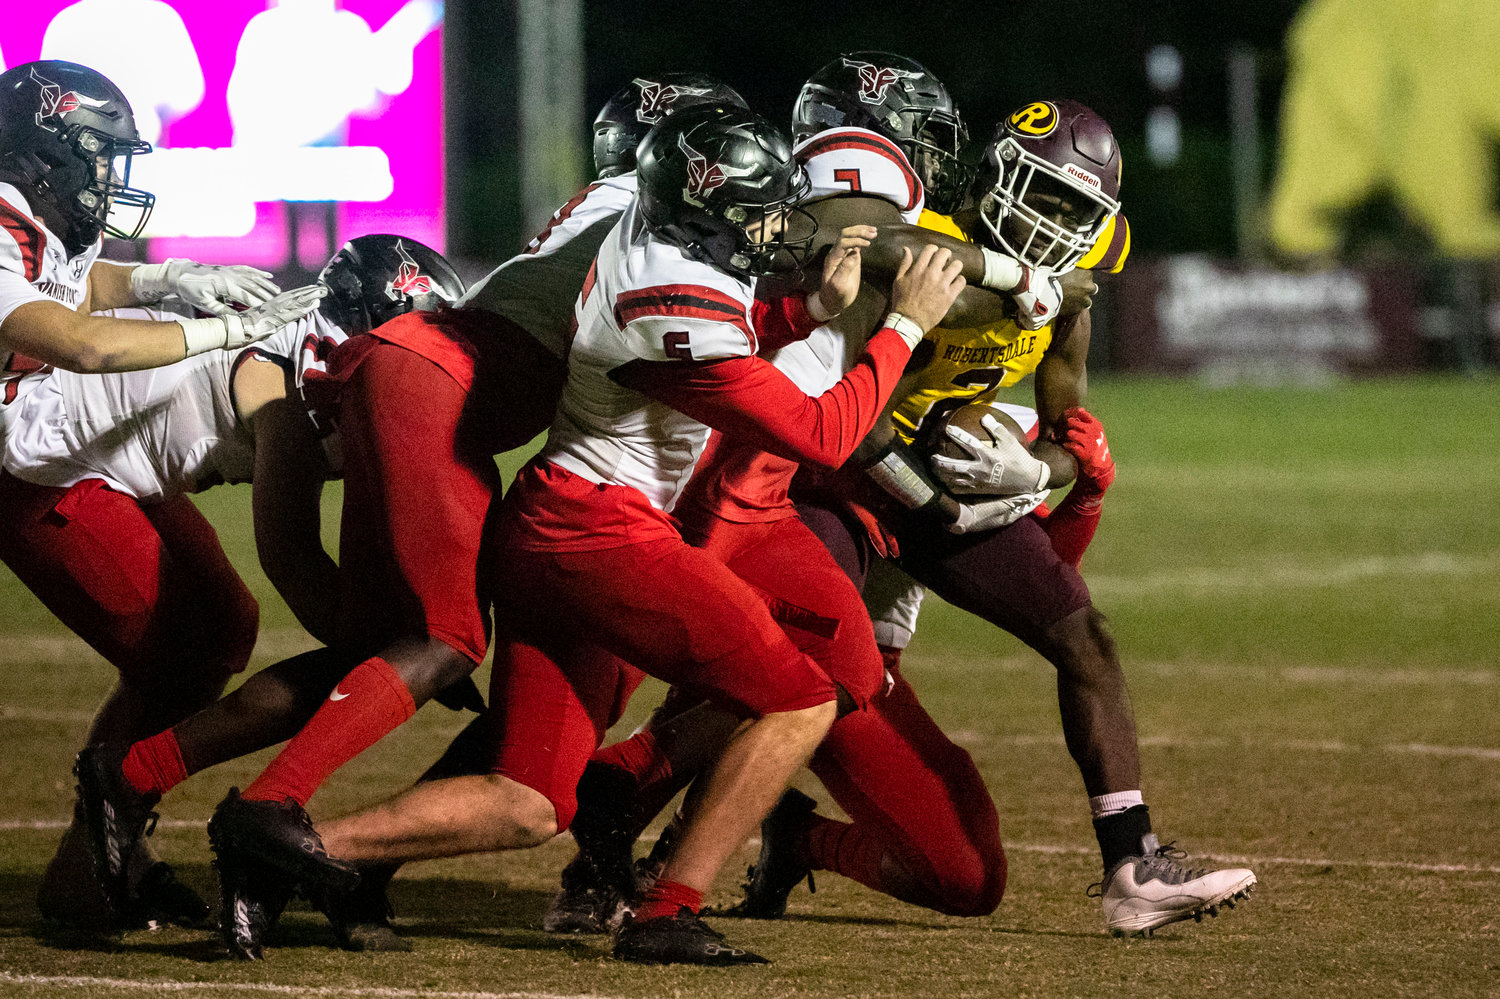 The Toro defense converges on Robertsdale running back Glen Williams in the first half of Spanish Fort’s 41-13 win over the Golden Bears in region play Friday night. The Toros registered a second-half shutout to seal the victory.